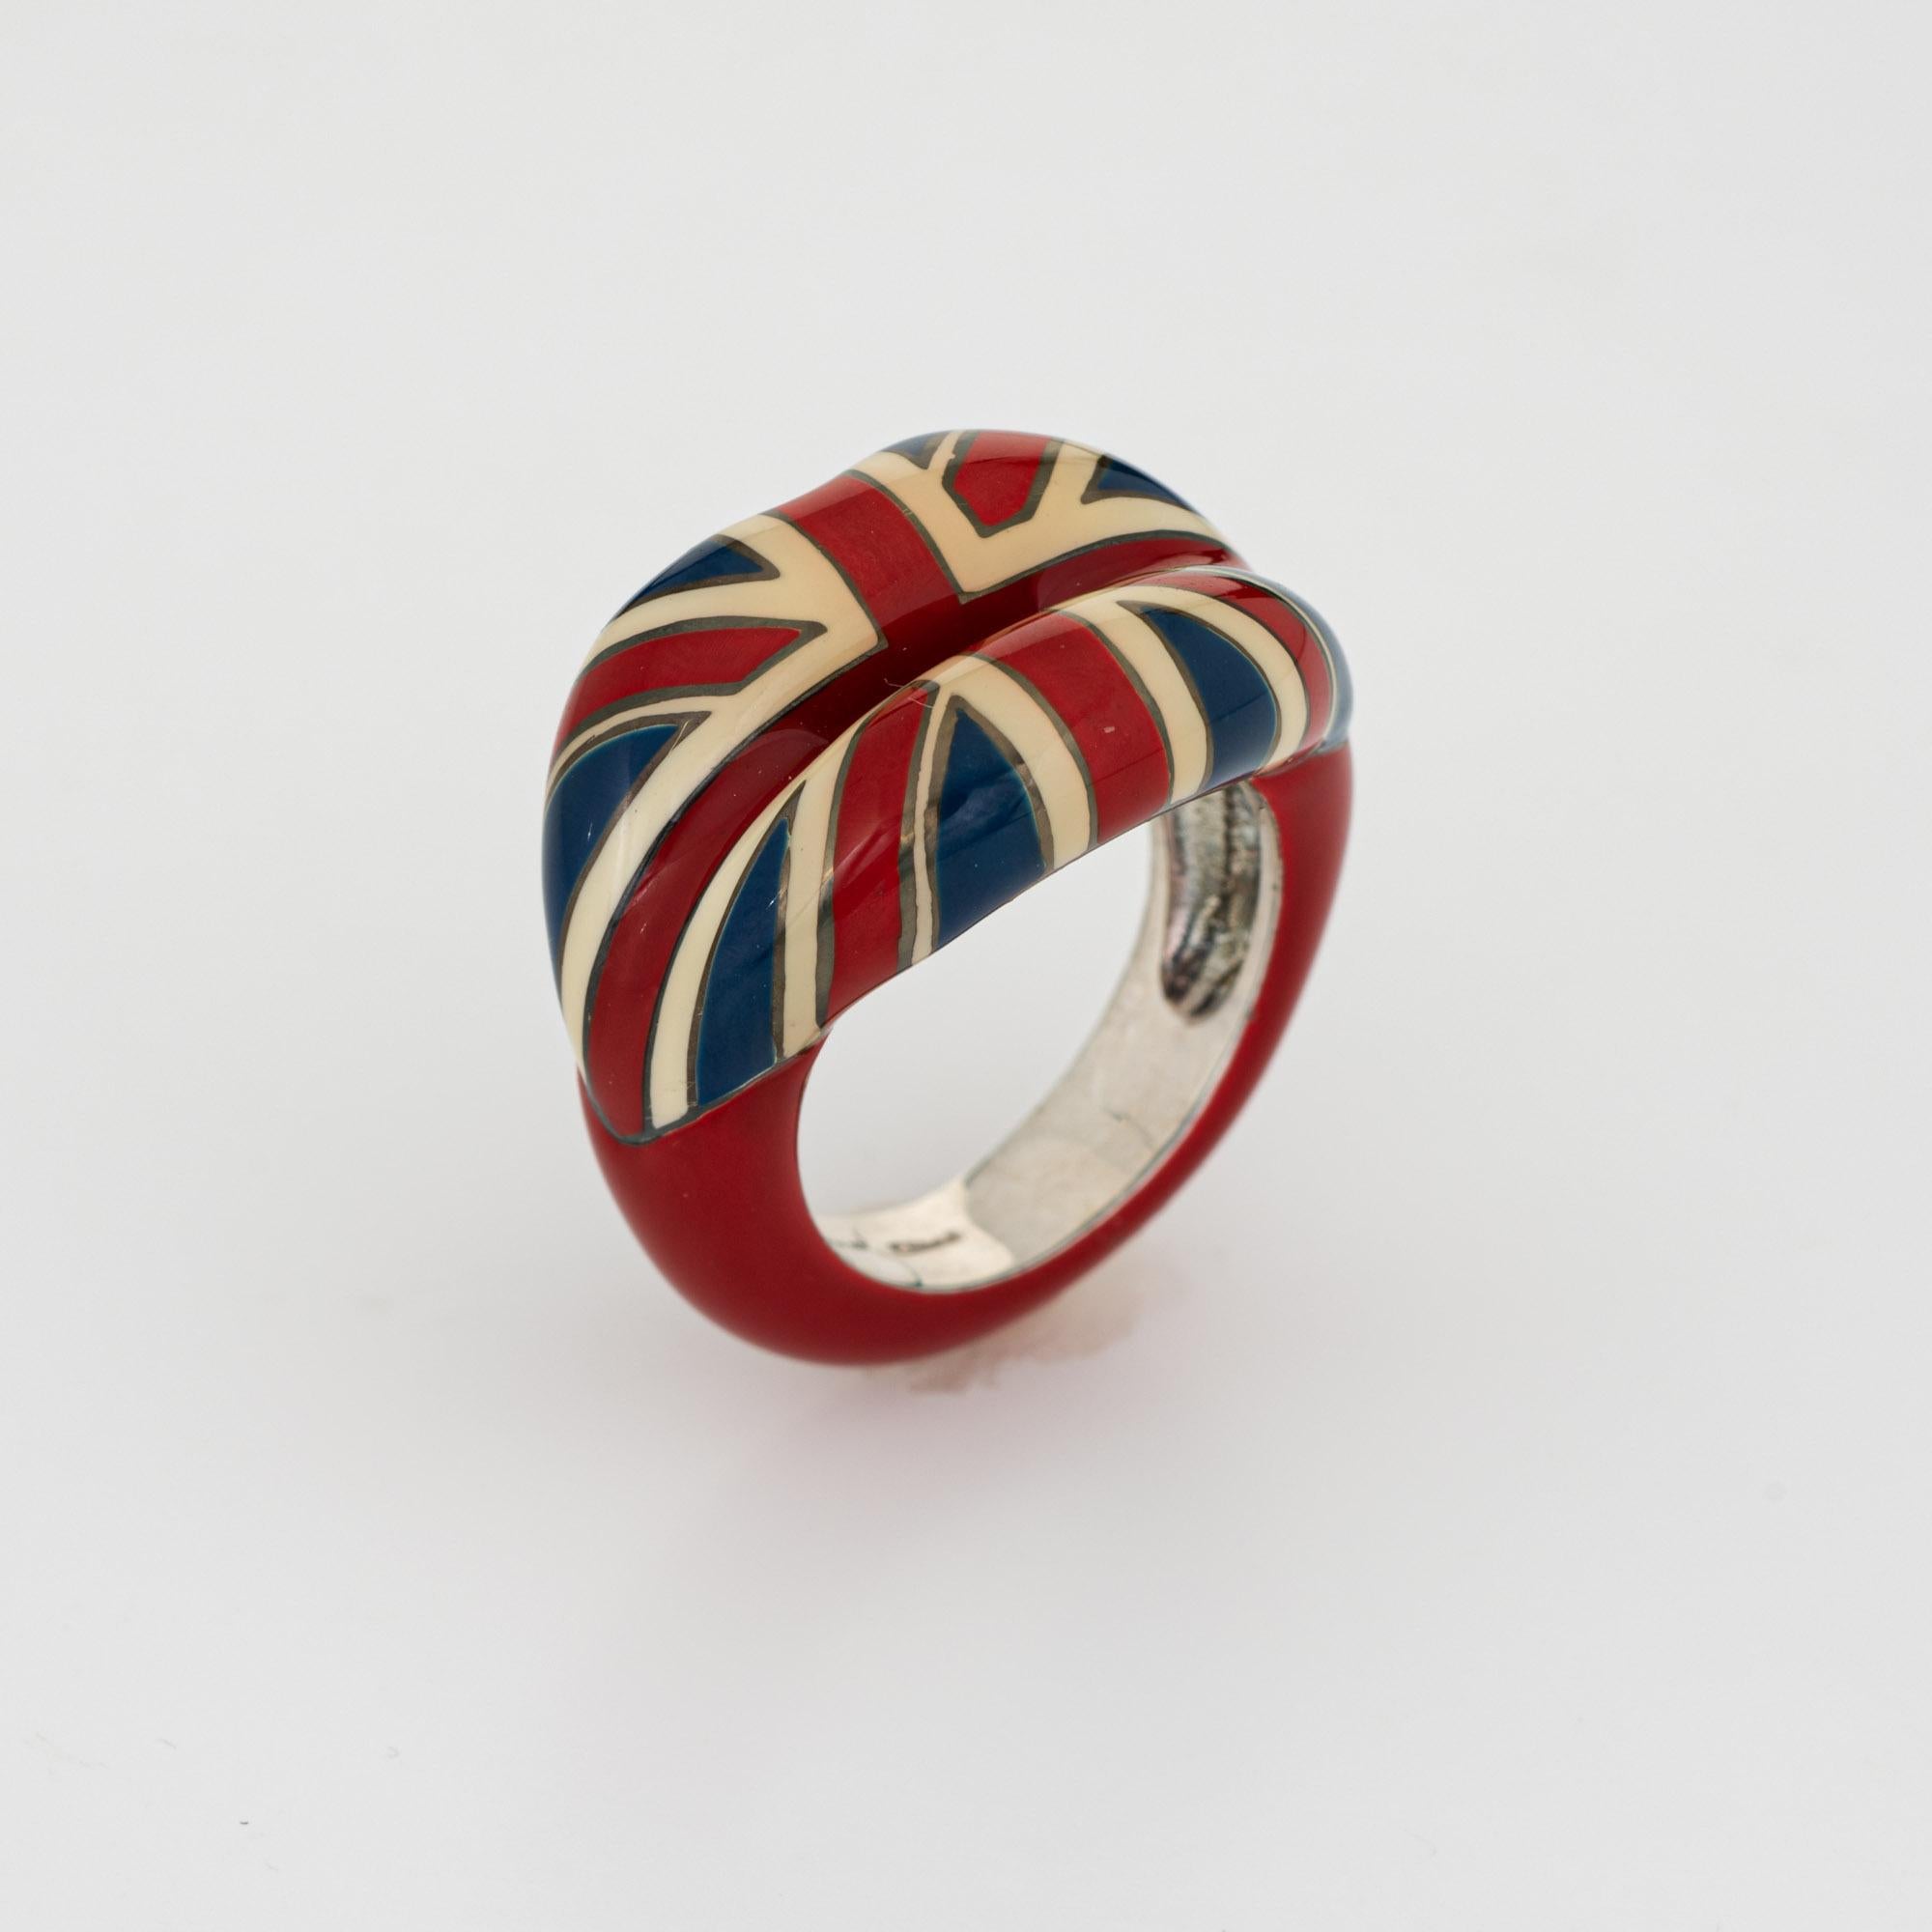 Stylish pre-owned Solange Azagury Partridge ring crafted in sterling silver. 

The 'hotlips' ring by Solange depicts the English Union Jack rendered in red, white and blue enamel. The low rise ring (6mm - 0.23 inches) sits comfortably on the finger.